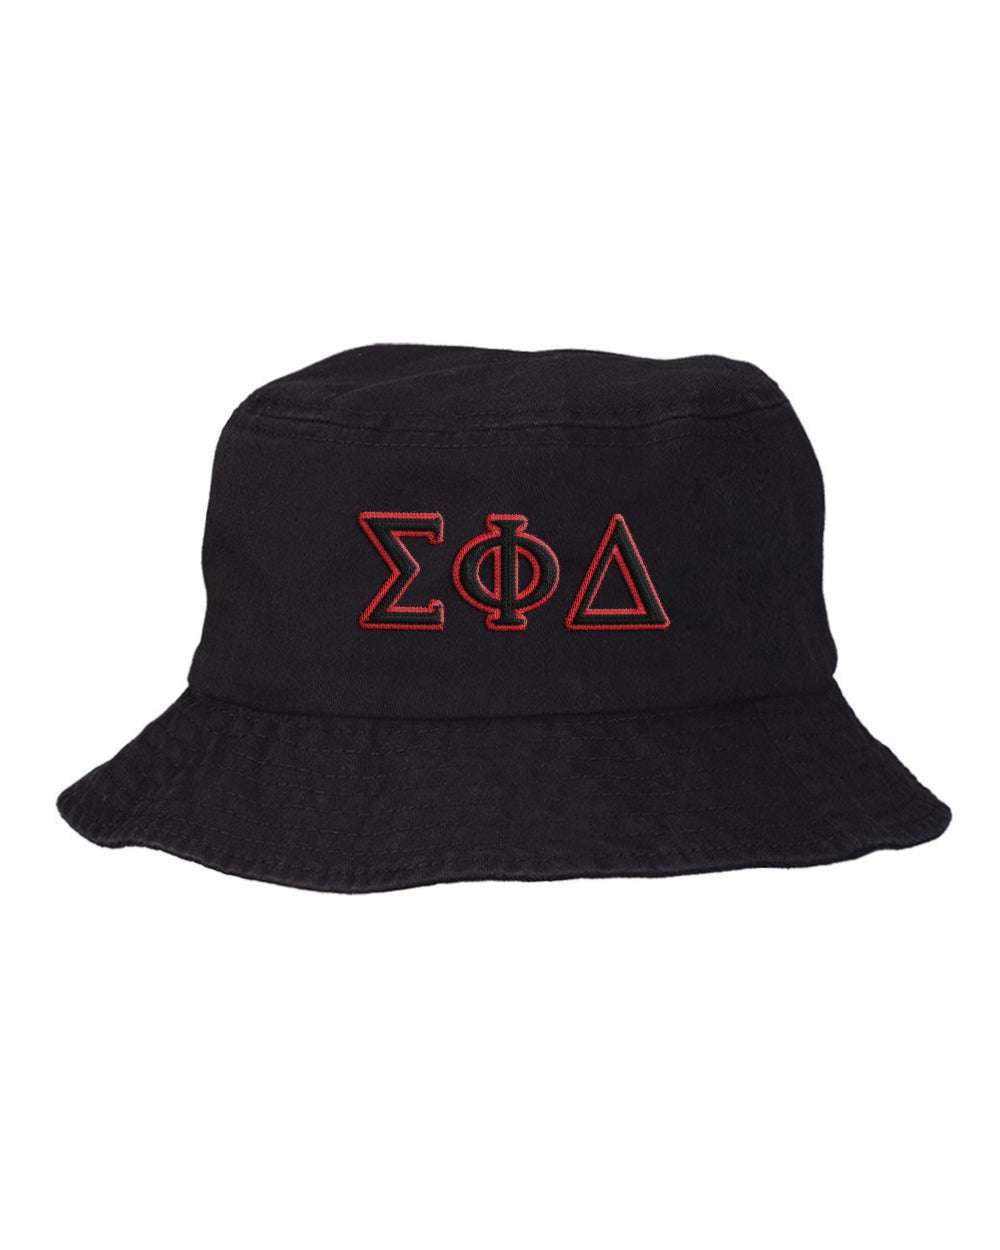 Sigma Phi Delta Embroidered Bucket Hat